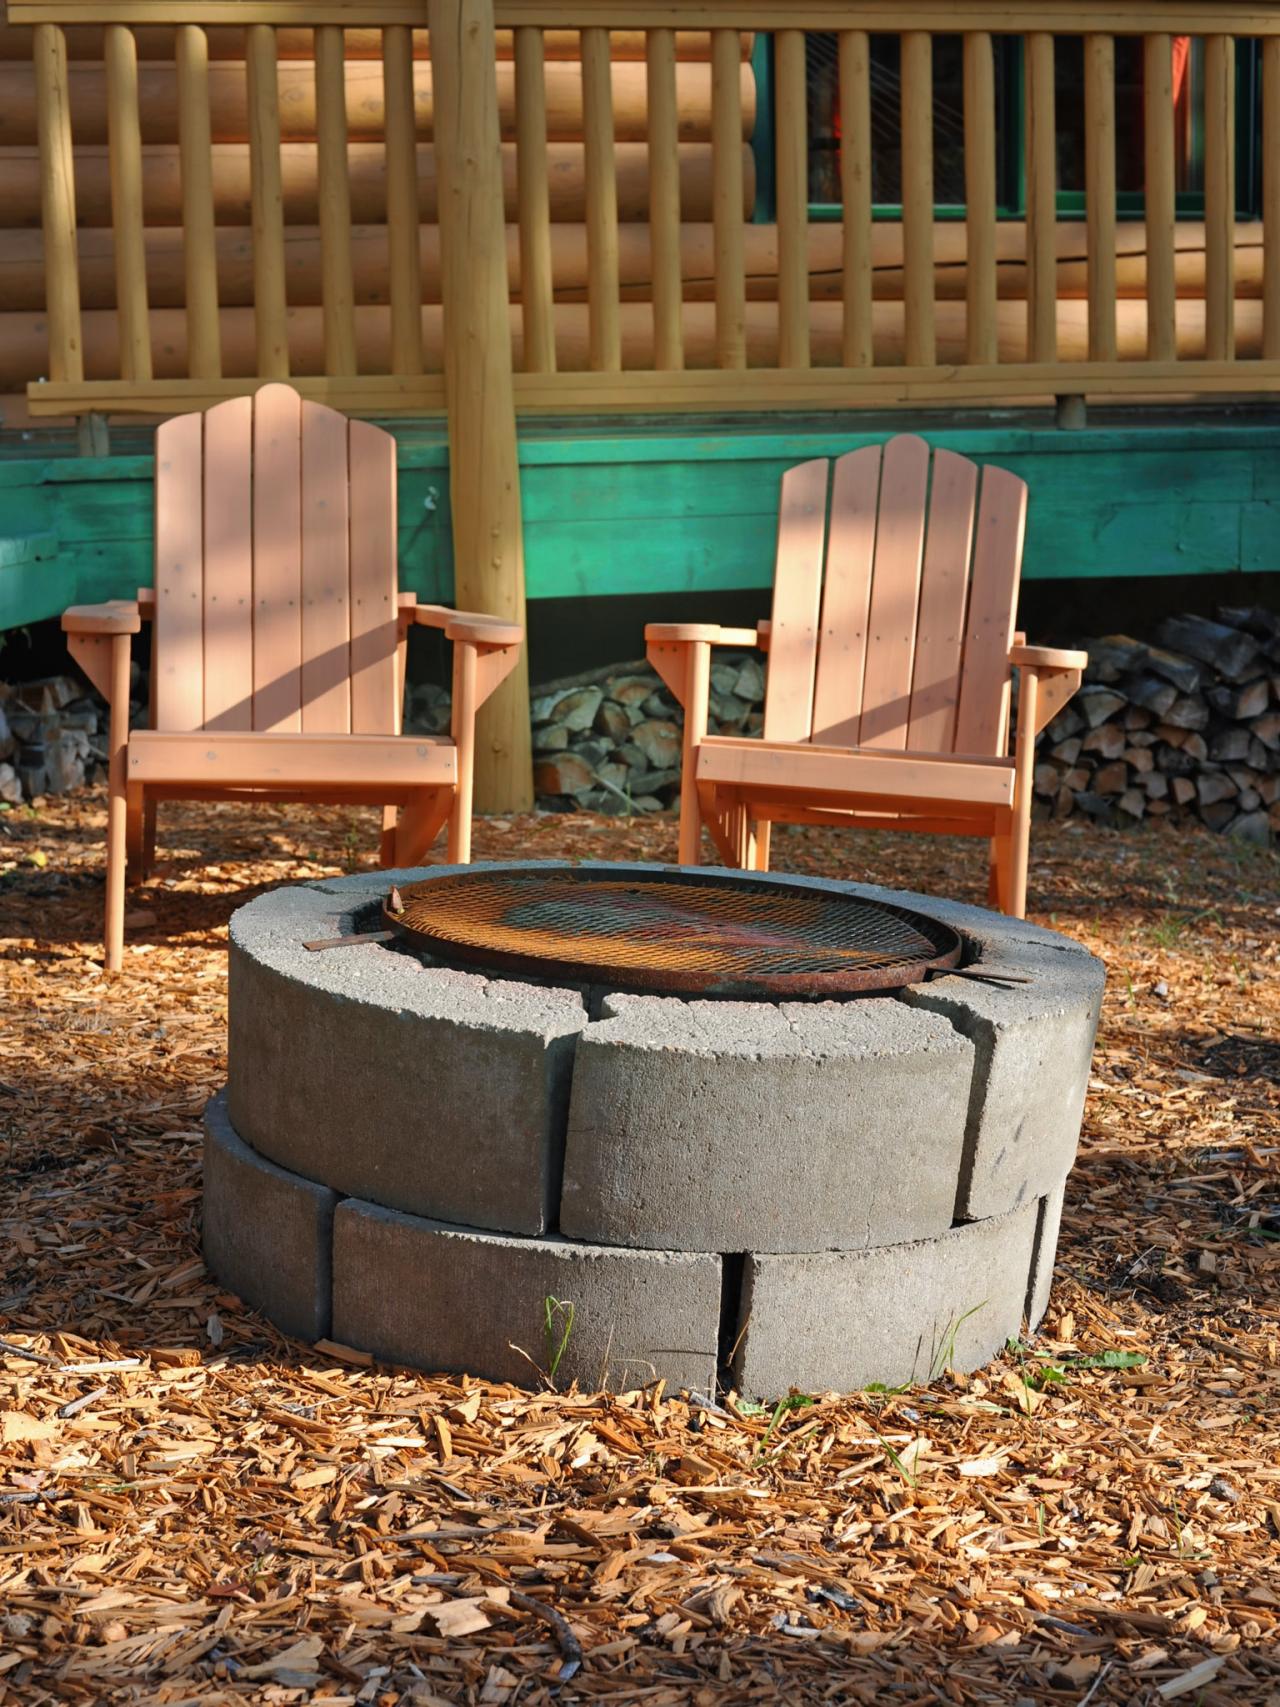 Cinder Block Fire Pits Design Ideas, How Many Retaining Wall Blocks To Build A Fire Pit